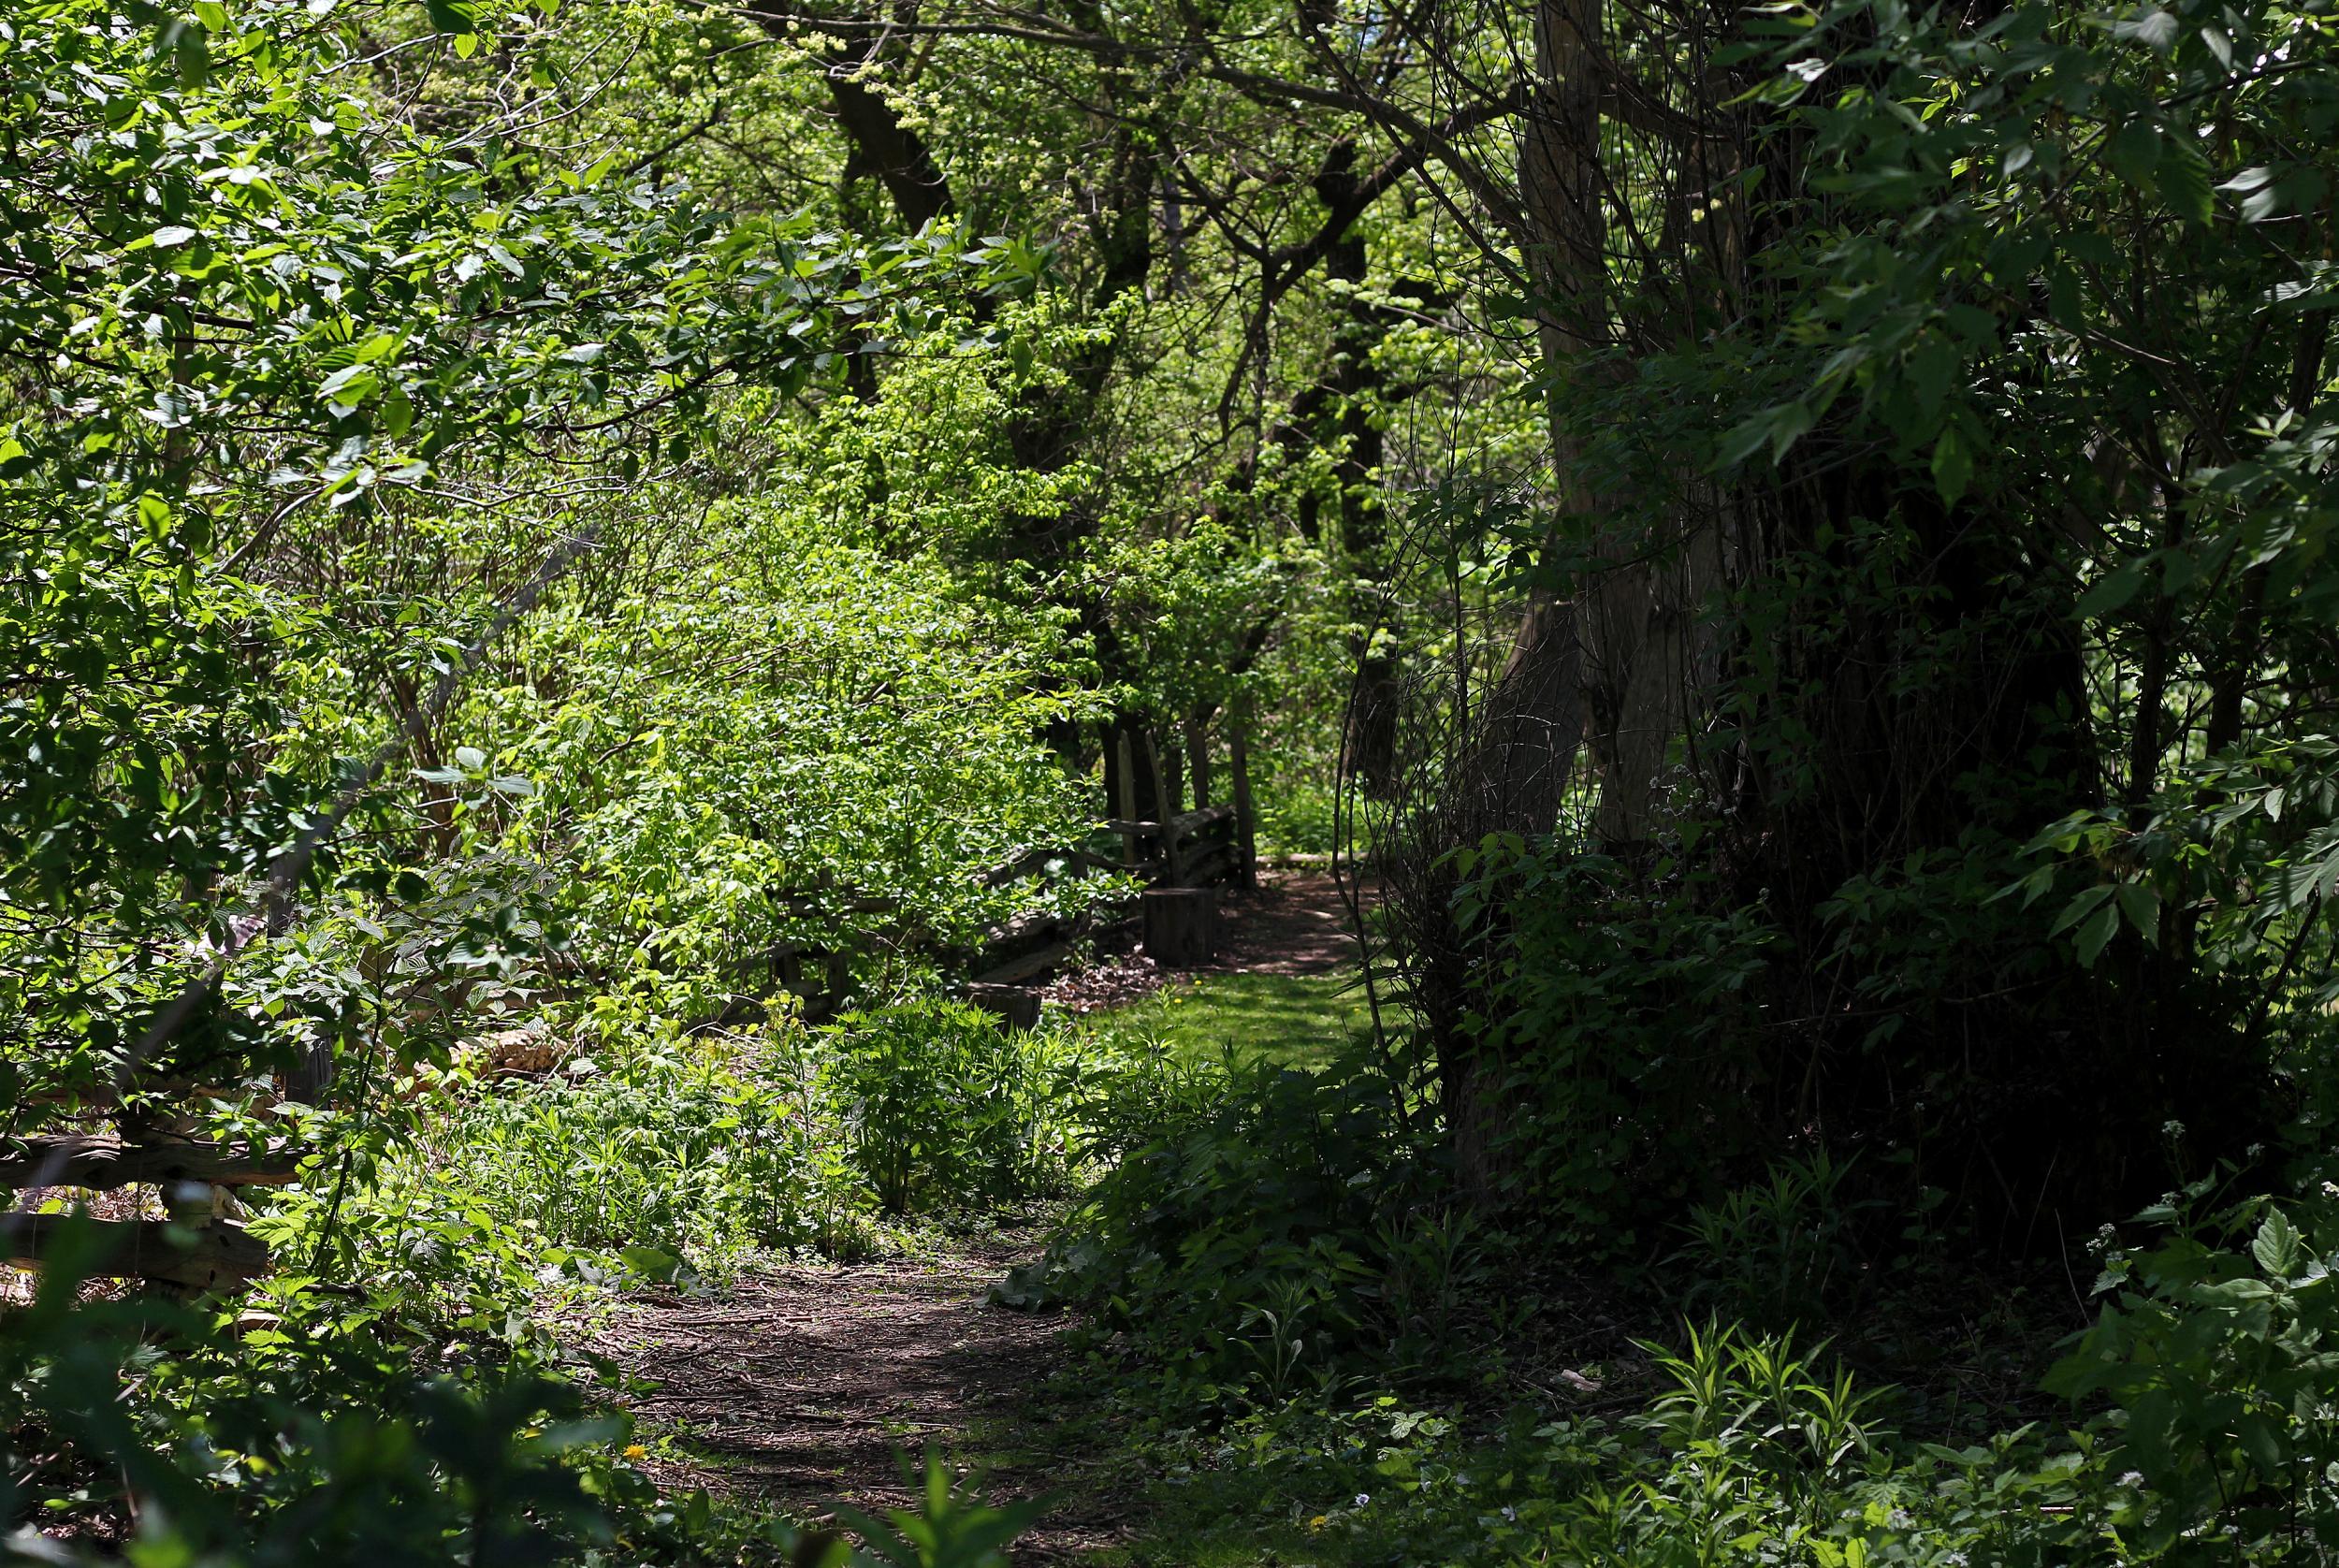 Toronto’s ravines can be explored by hiking or biking